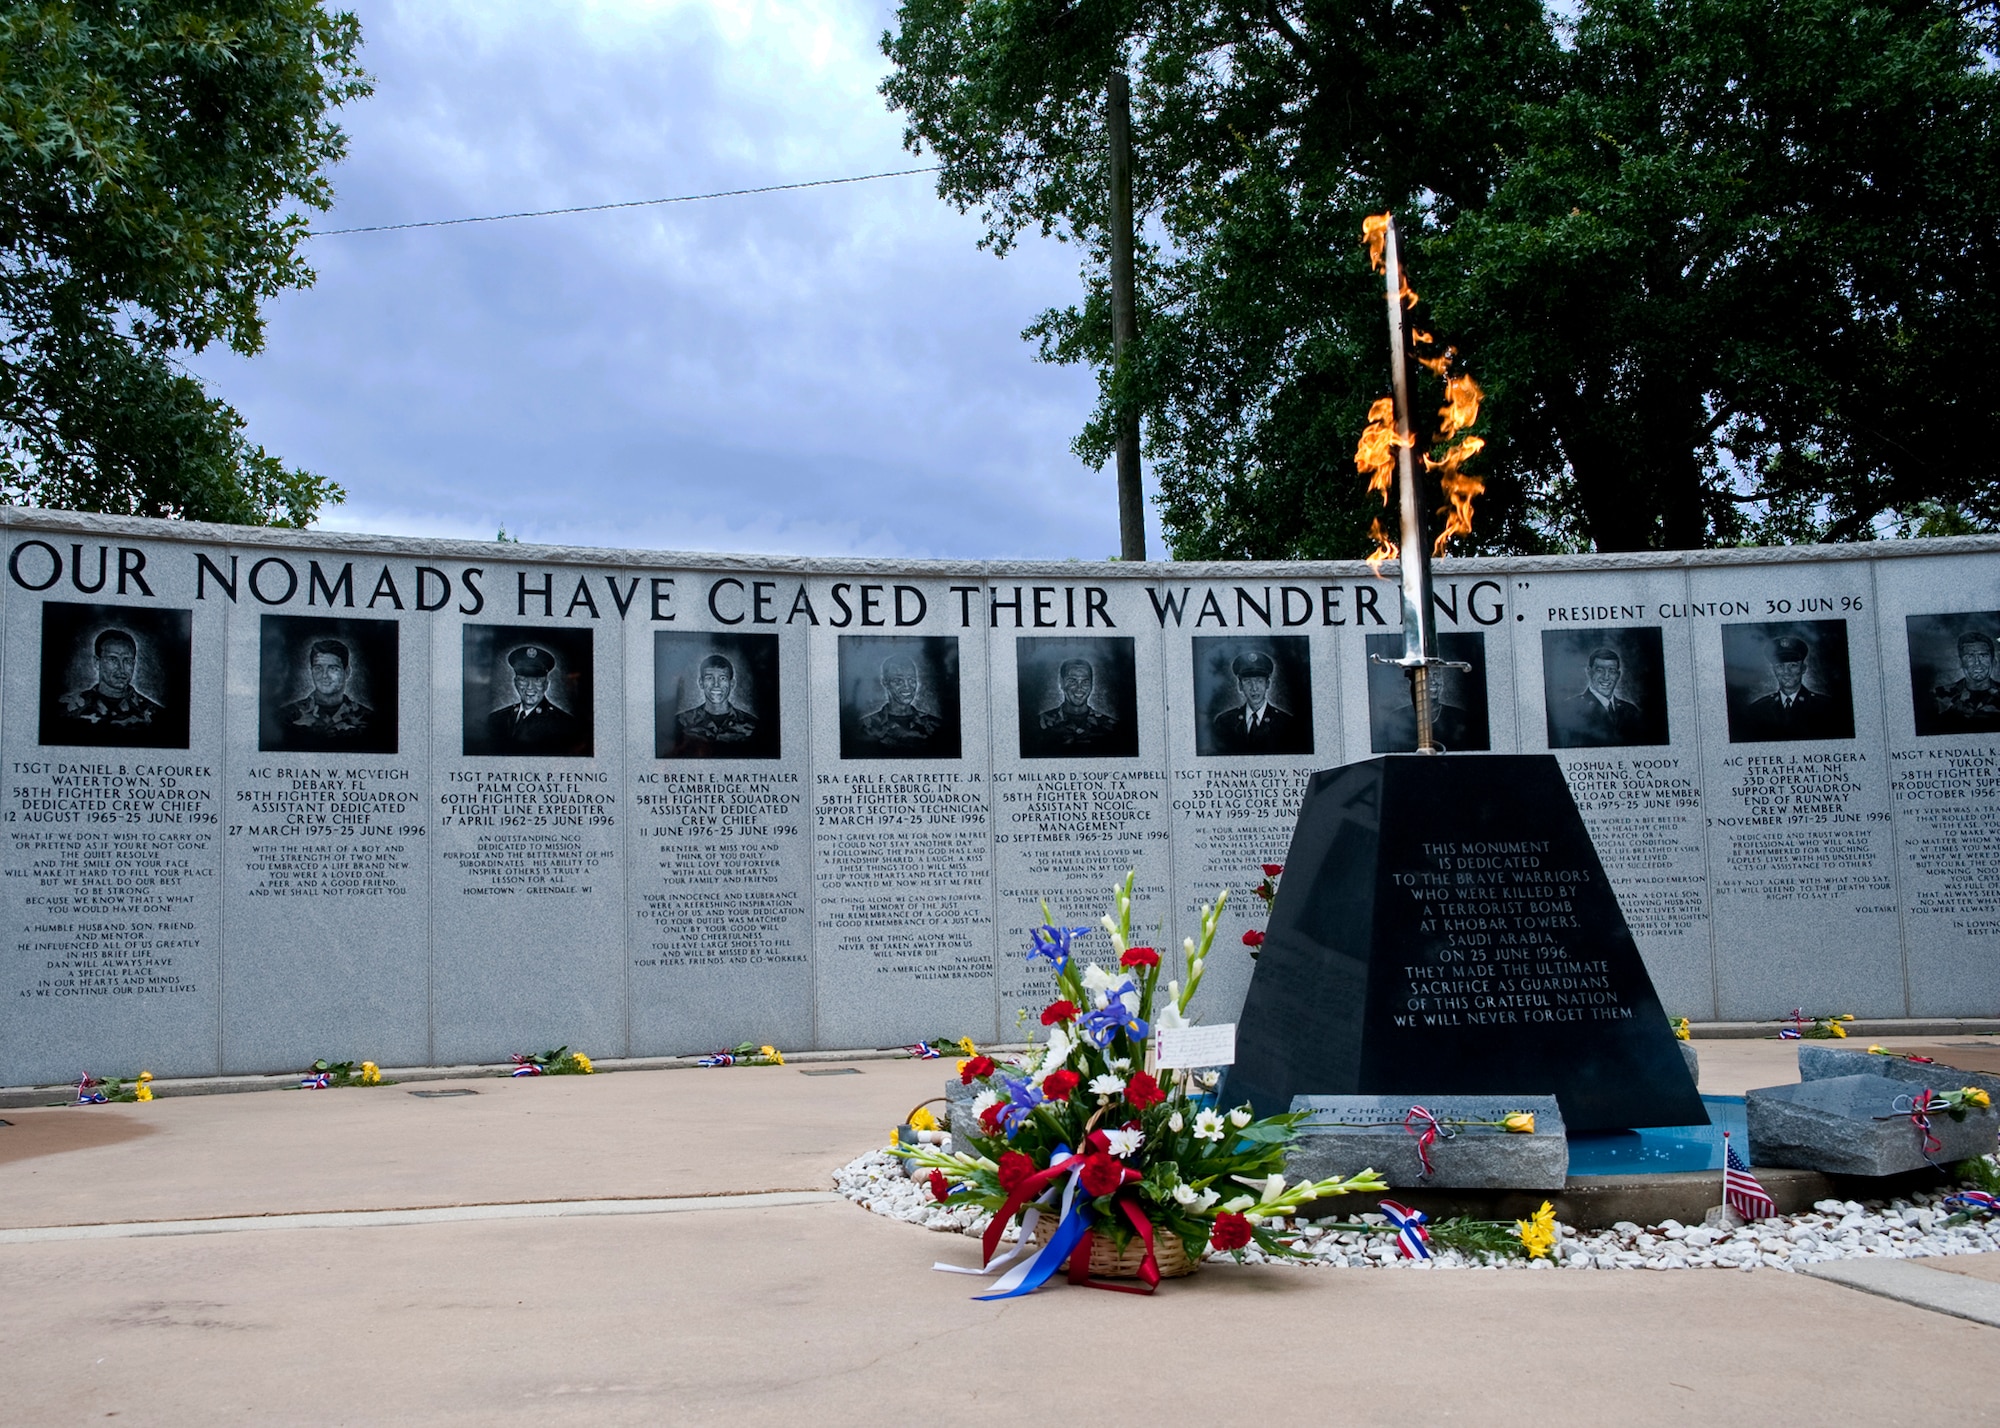 The Khobar Towers eternal flame monument and memorial wall at Eglin Air Force Base, Fla., were dedicated one year after the Khobar Towers bombing June 25, 1996. (U.S. Air Force photo/Samuel King Jr.)